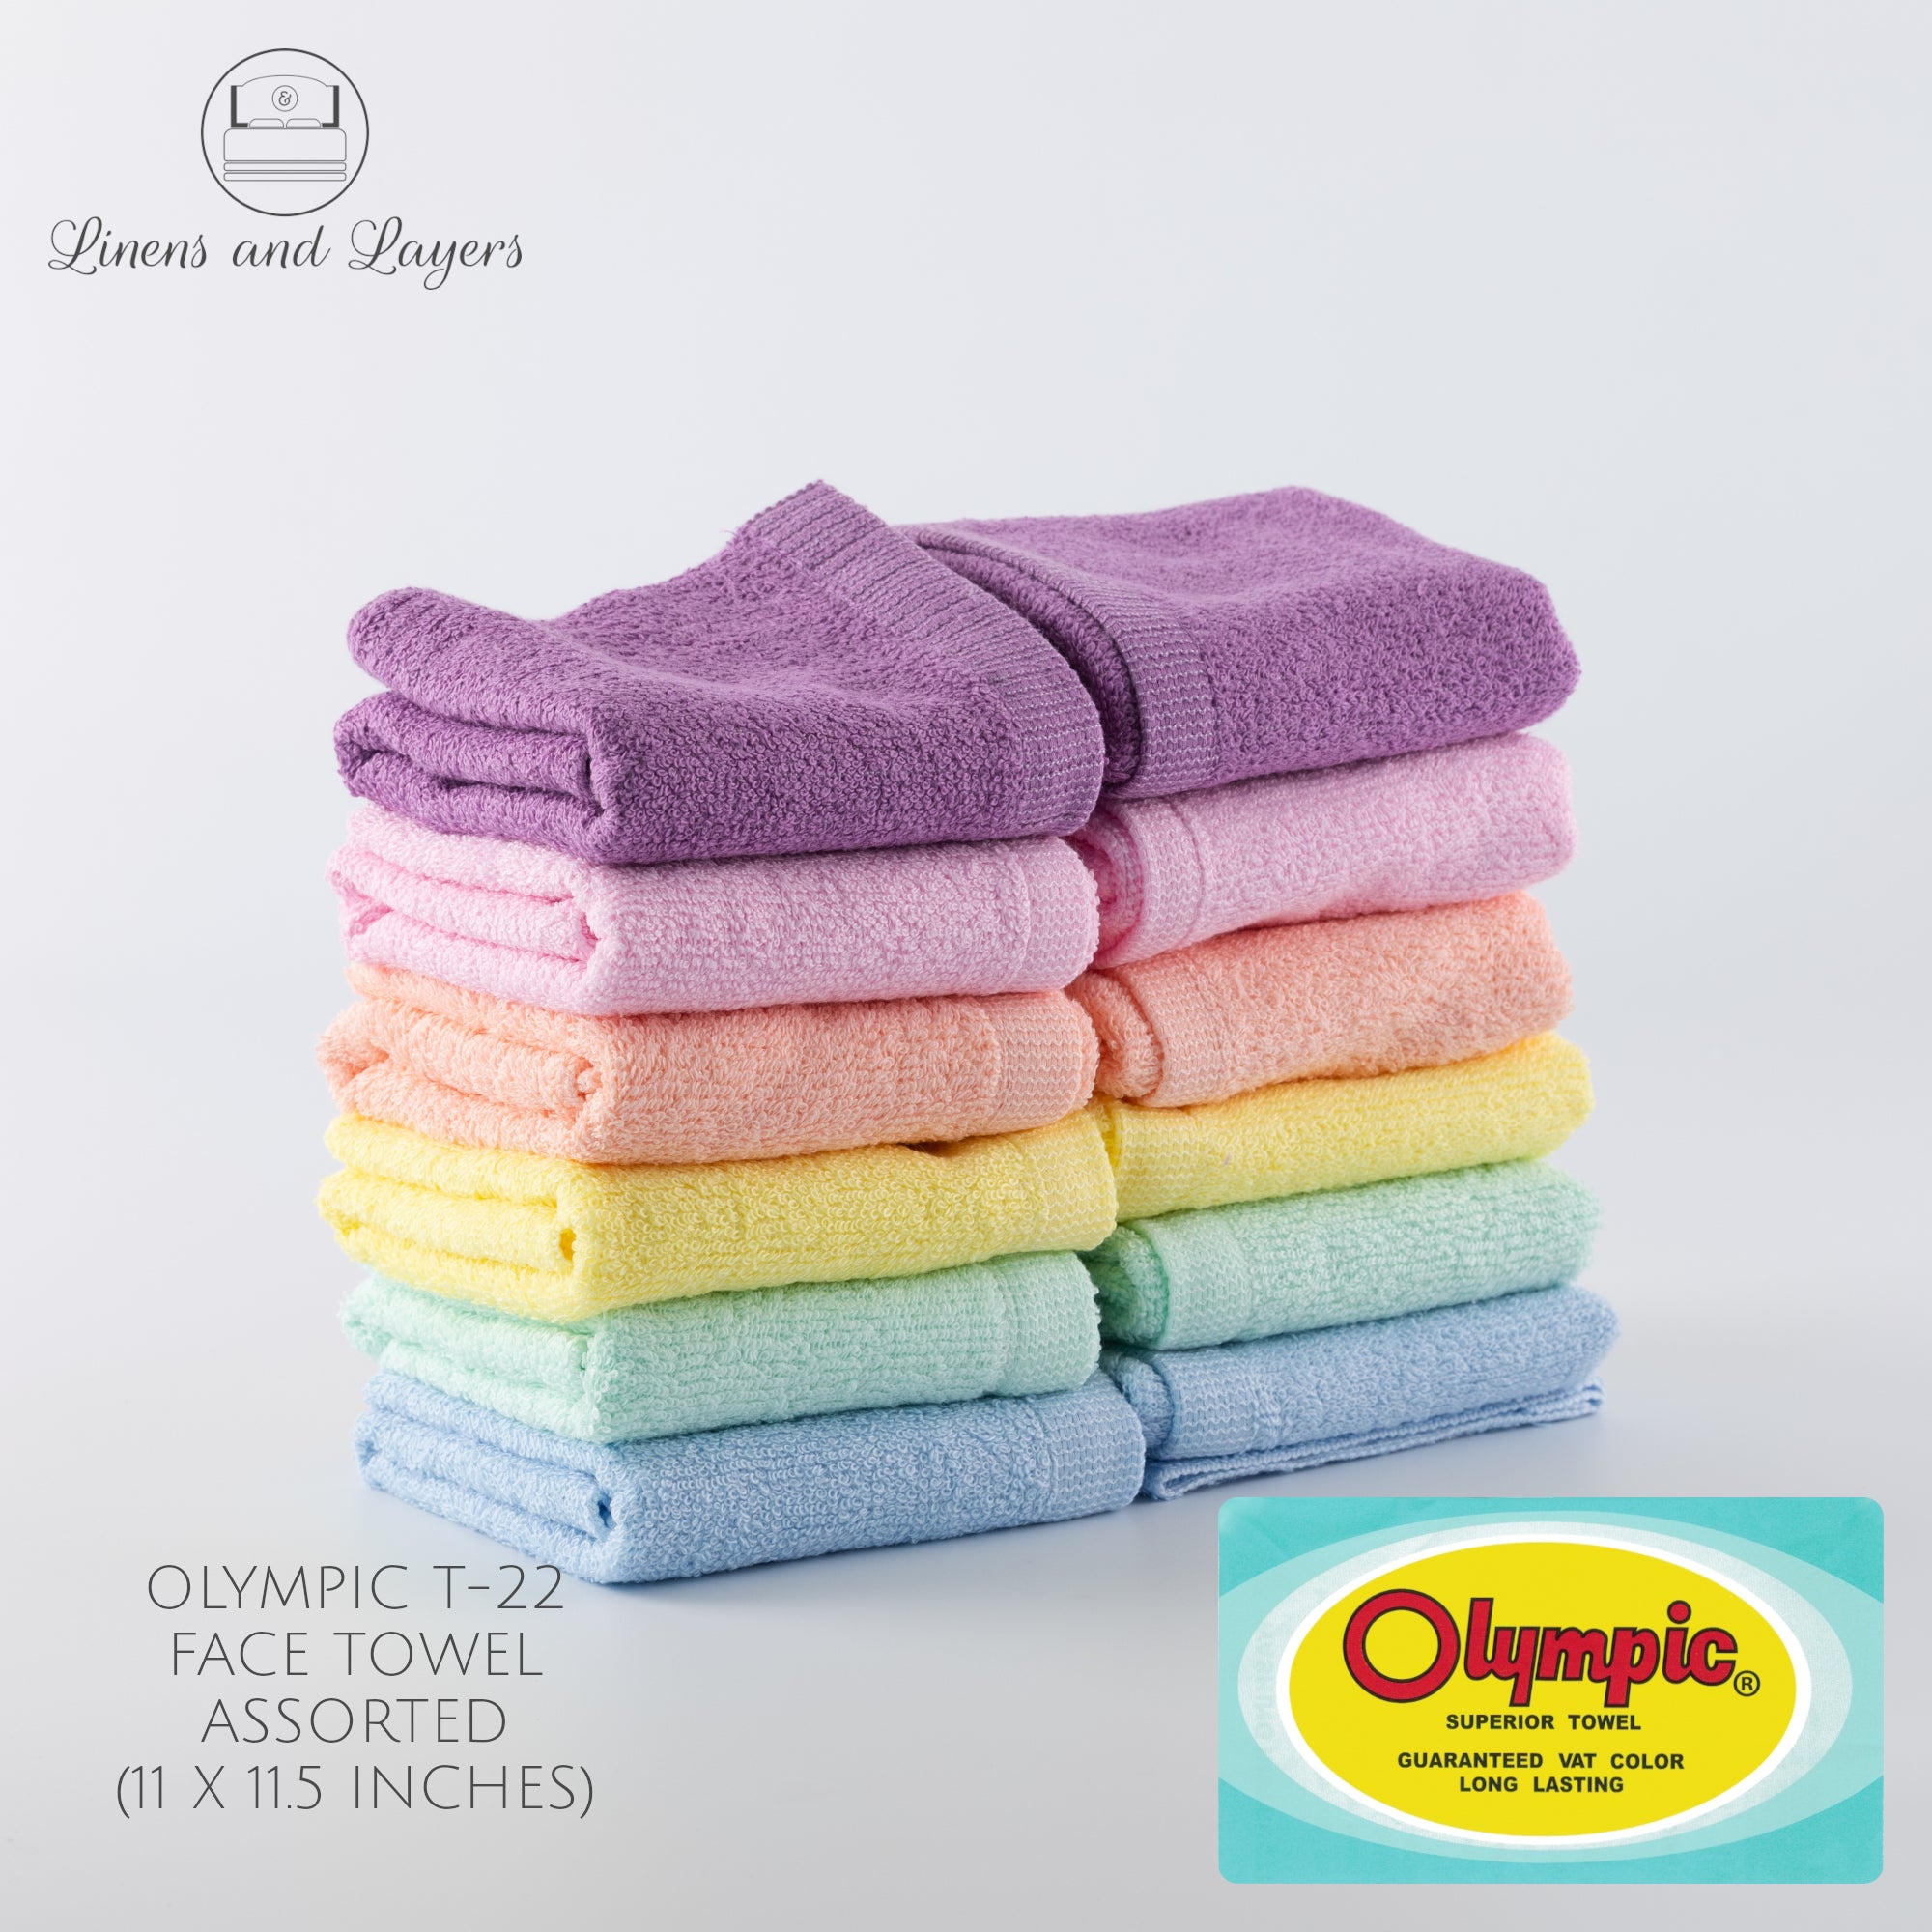 Olympic Face Towel (256 GSM) - T22 Terrycloth - 11x11.5 inches